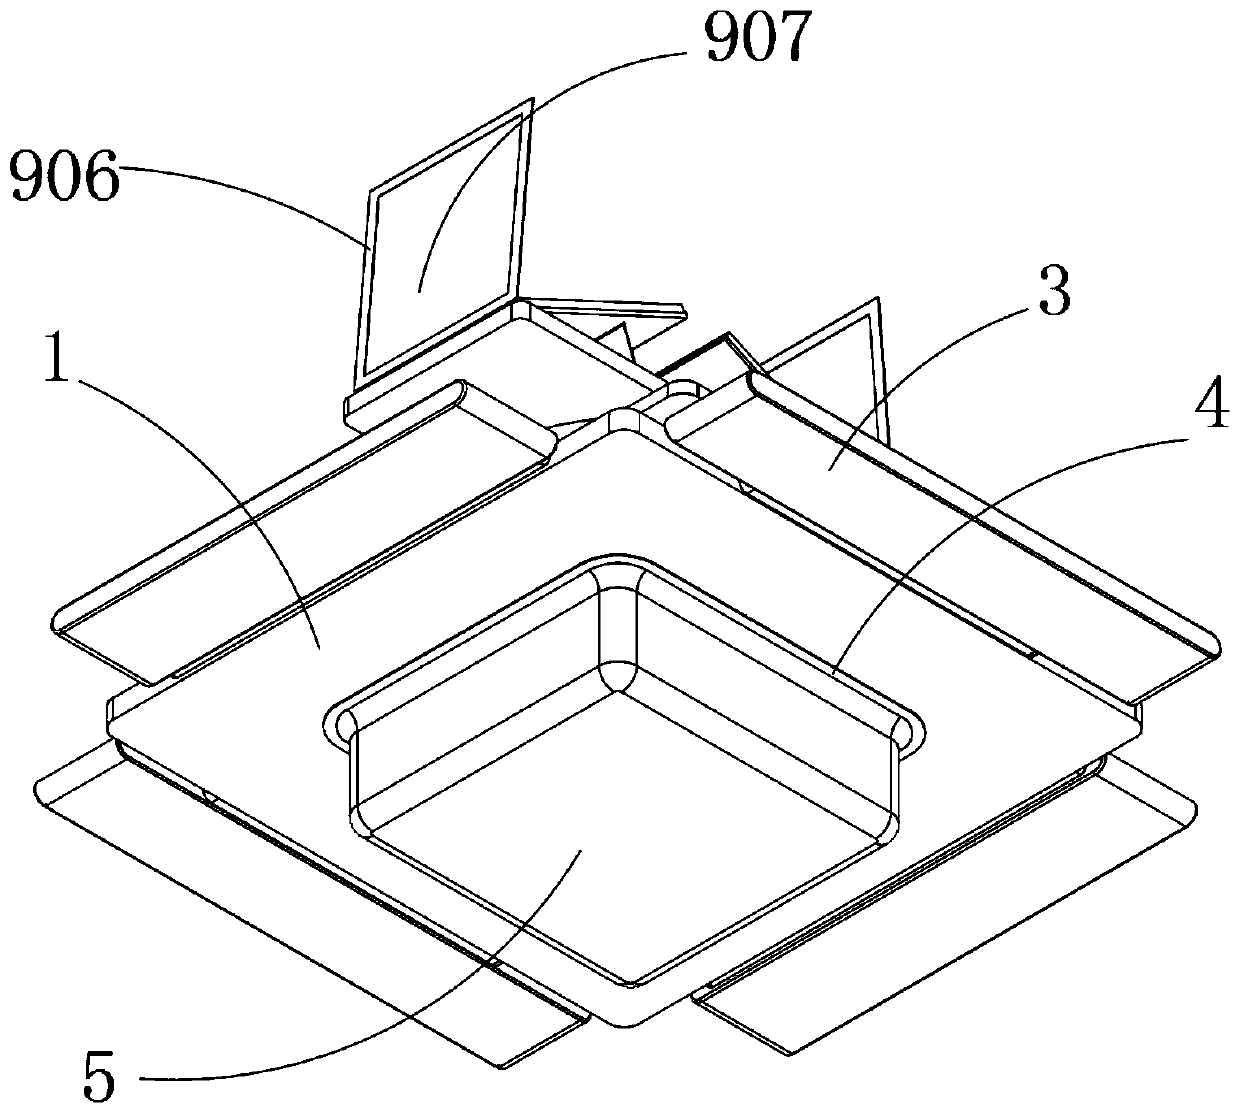 Solar photovoltaic panel connecting and detaching mechanism based on water surface